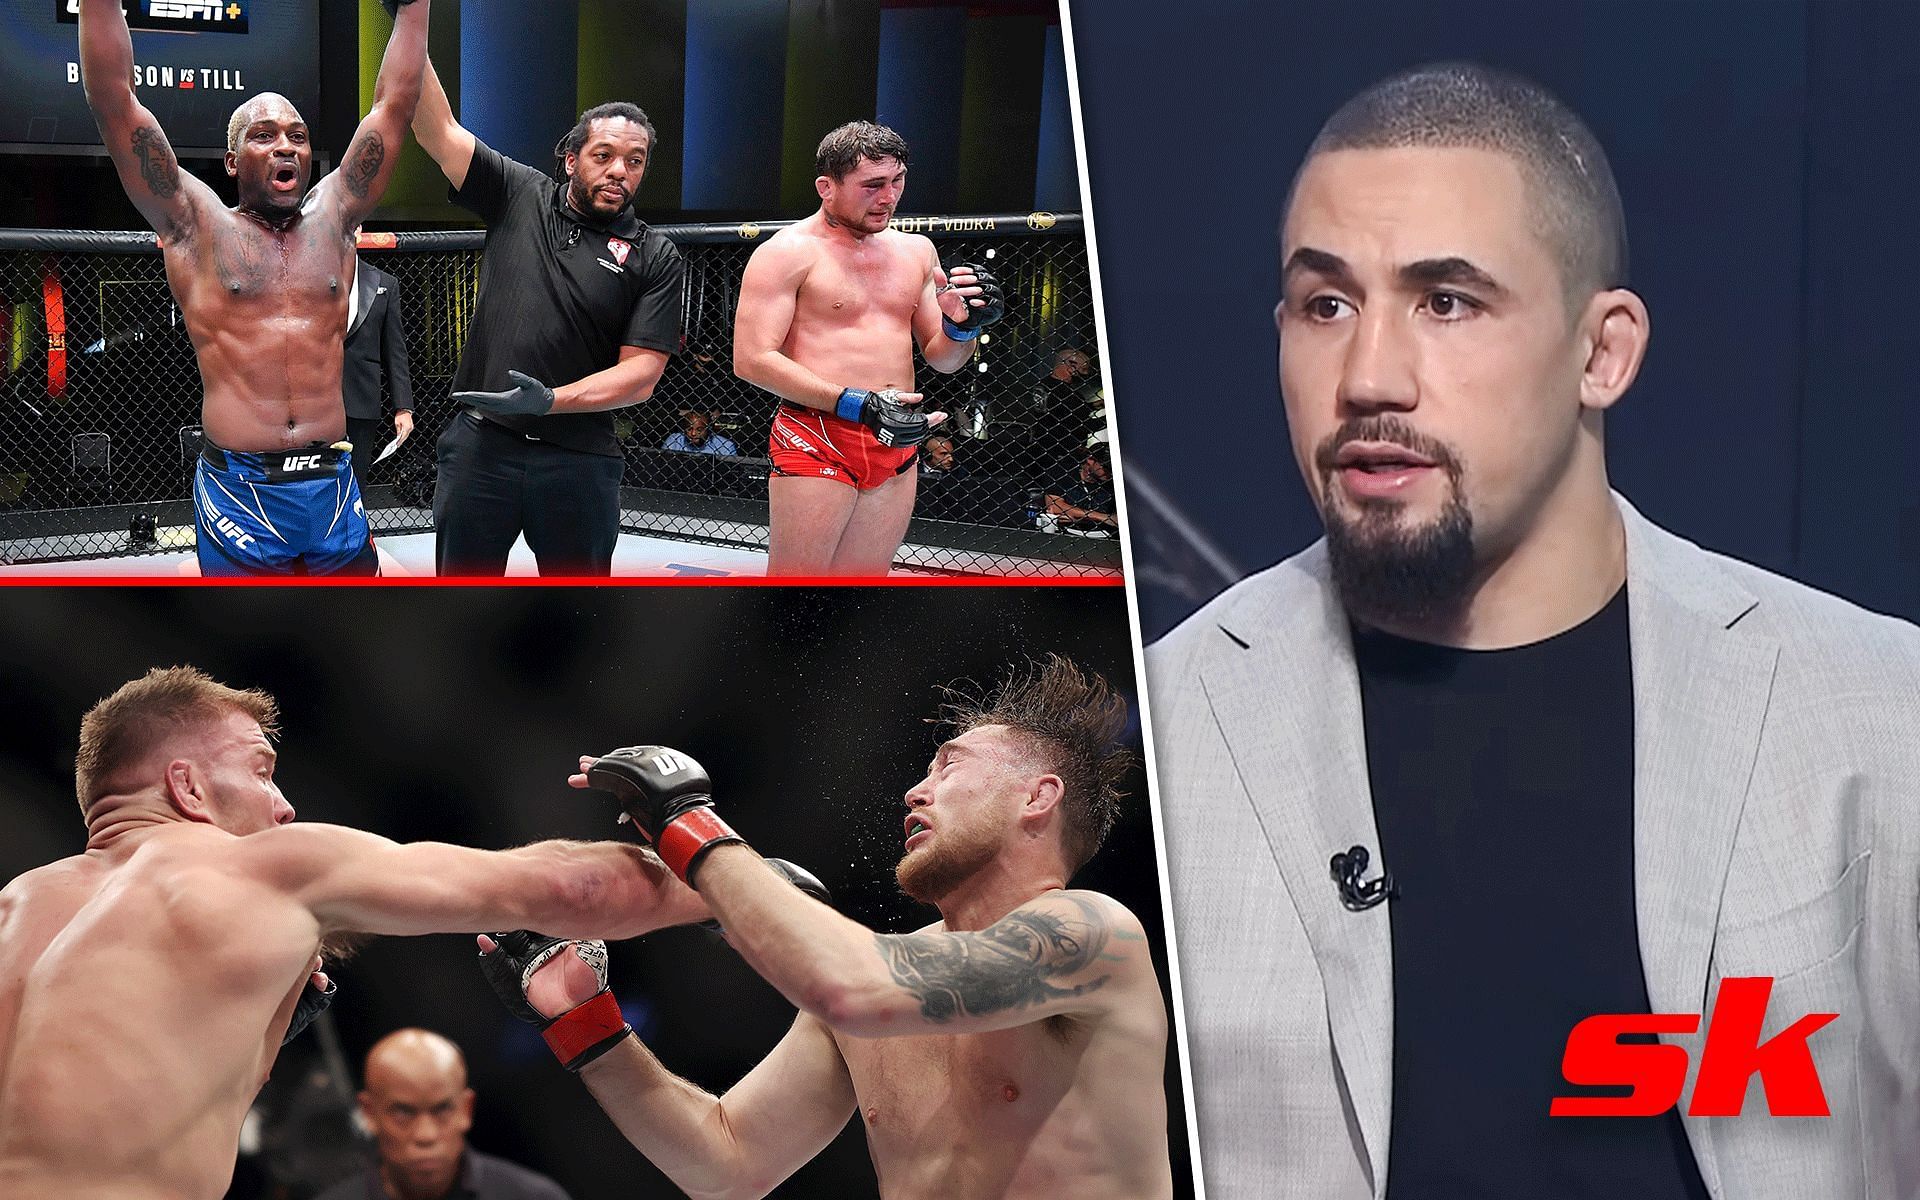  Darren Till losses (right) and Robert Whittaker (right) [Image Credits: Getty Images and @mainevent on YouTube]